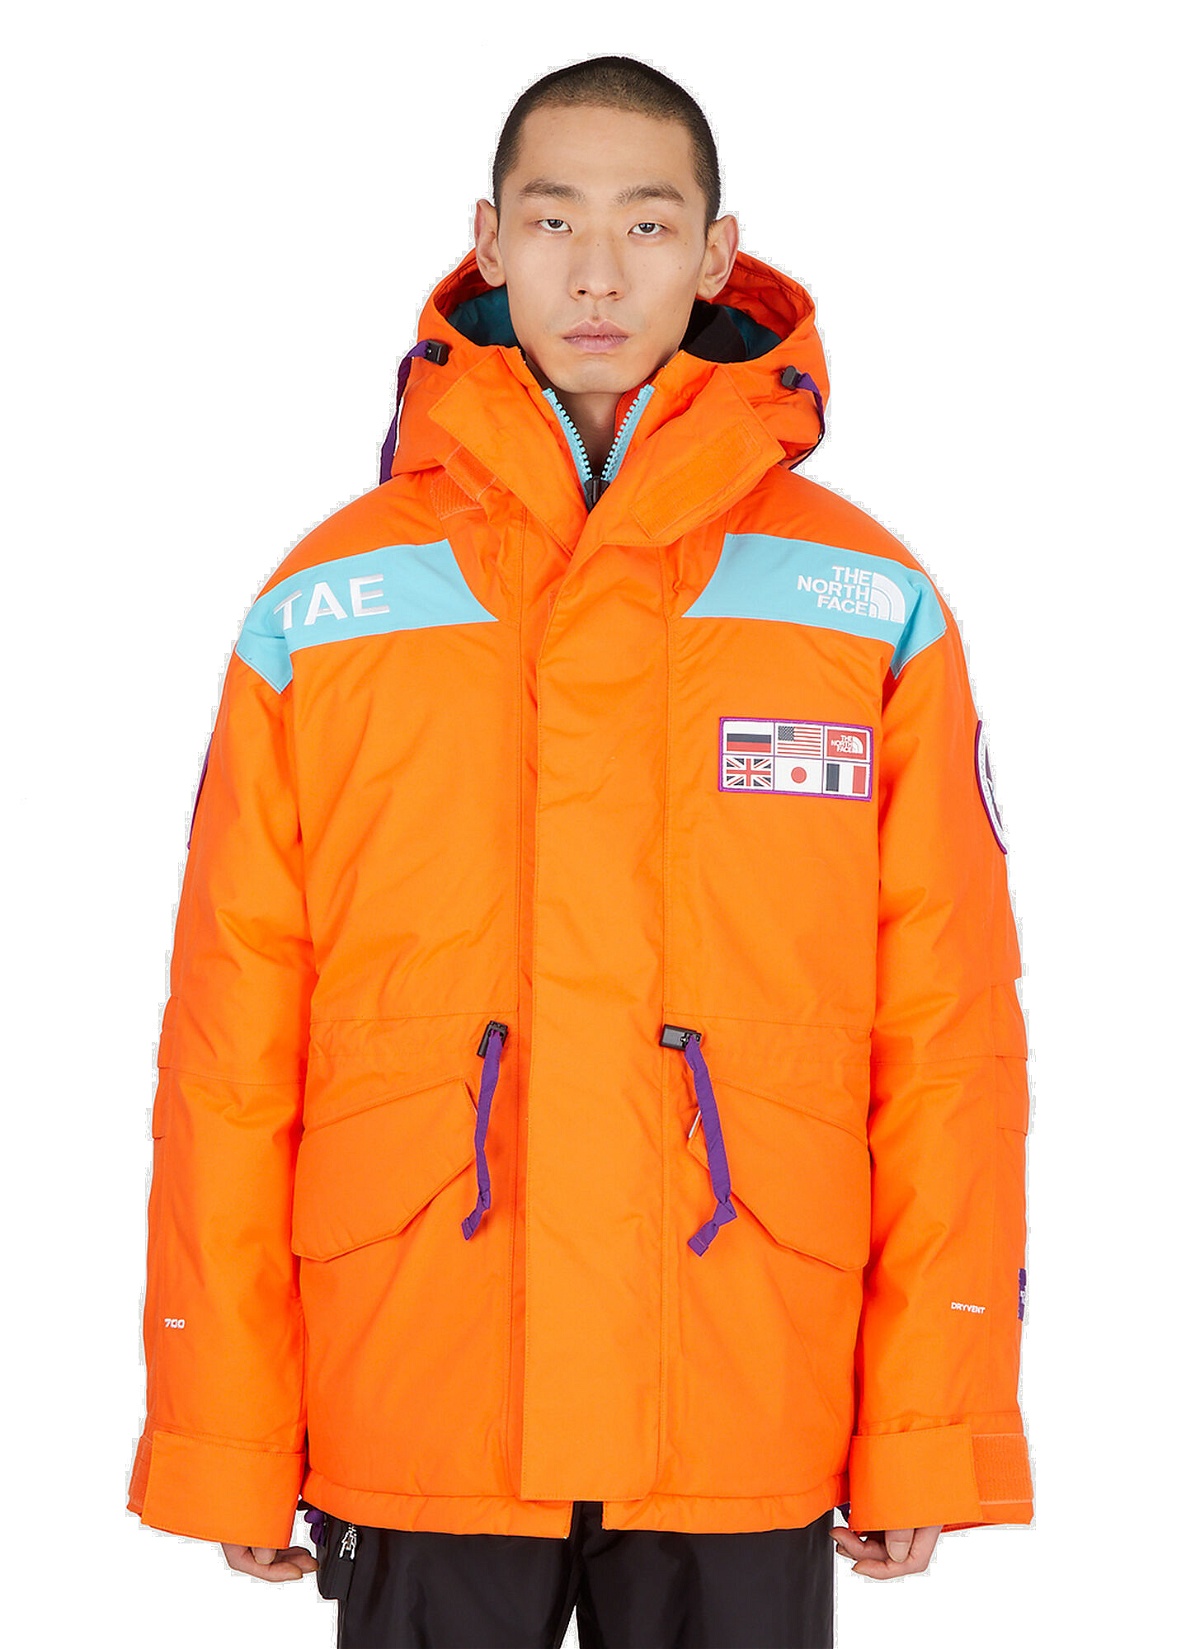 Trans Antarctica Expedition Jacket in Orange The North Face